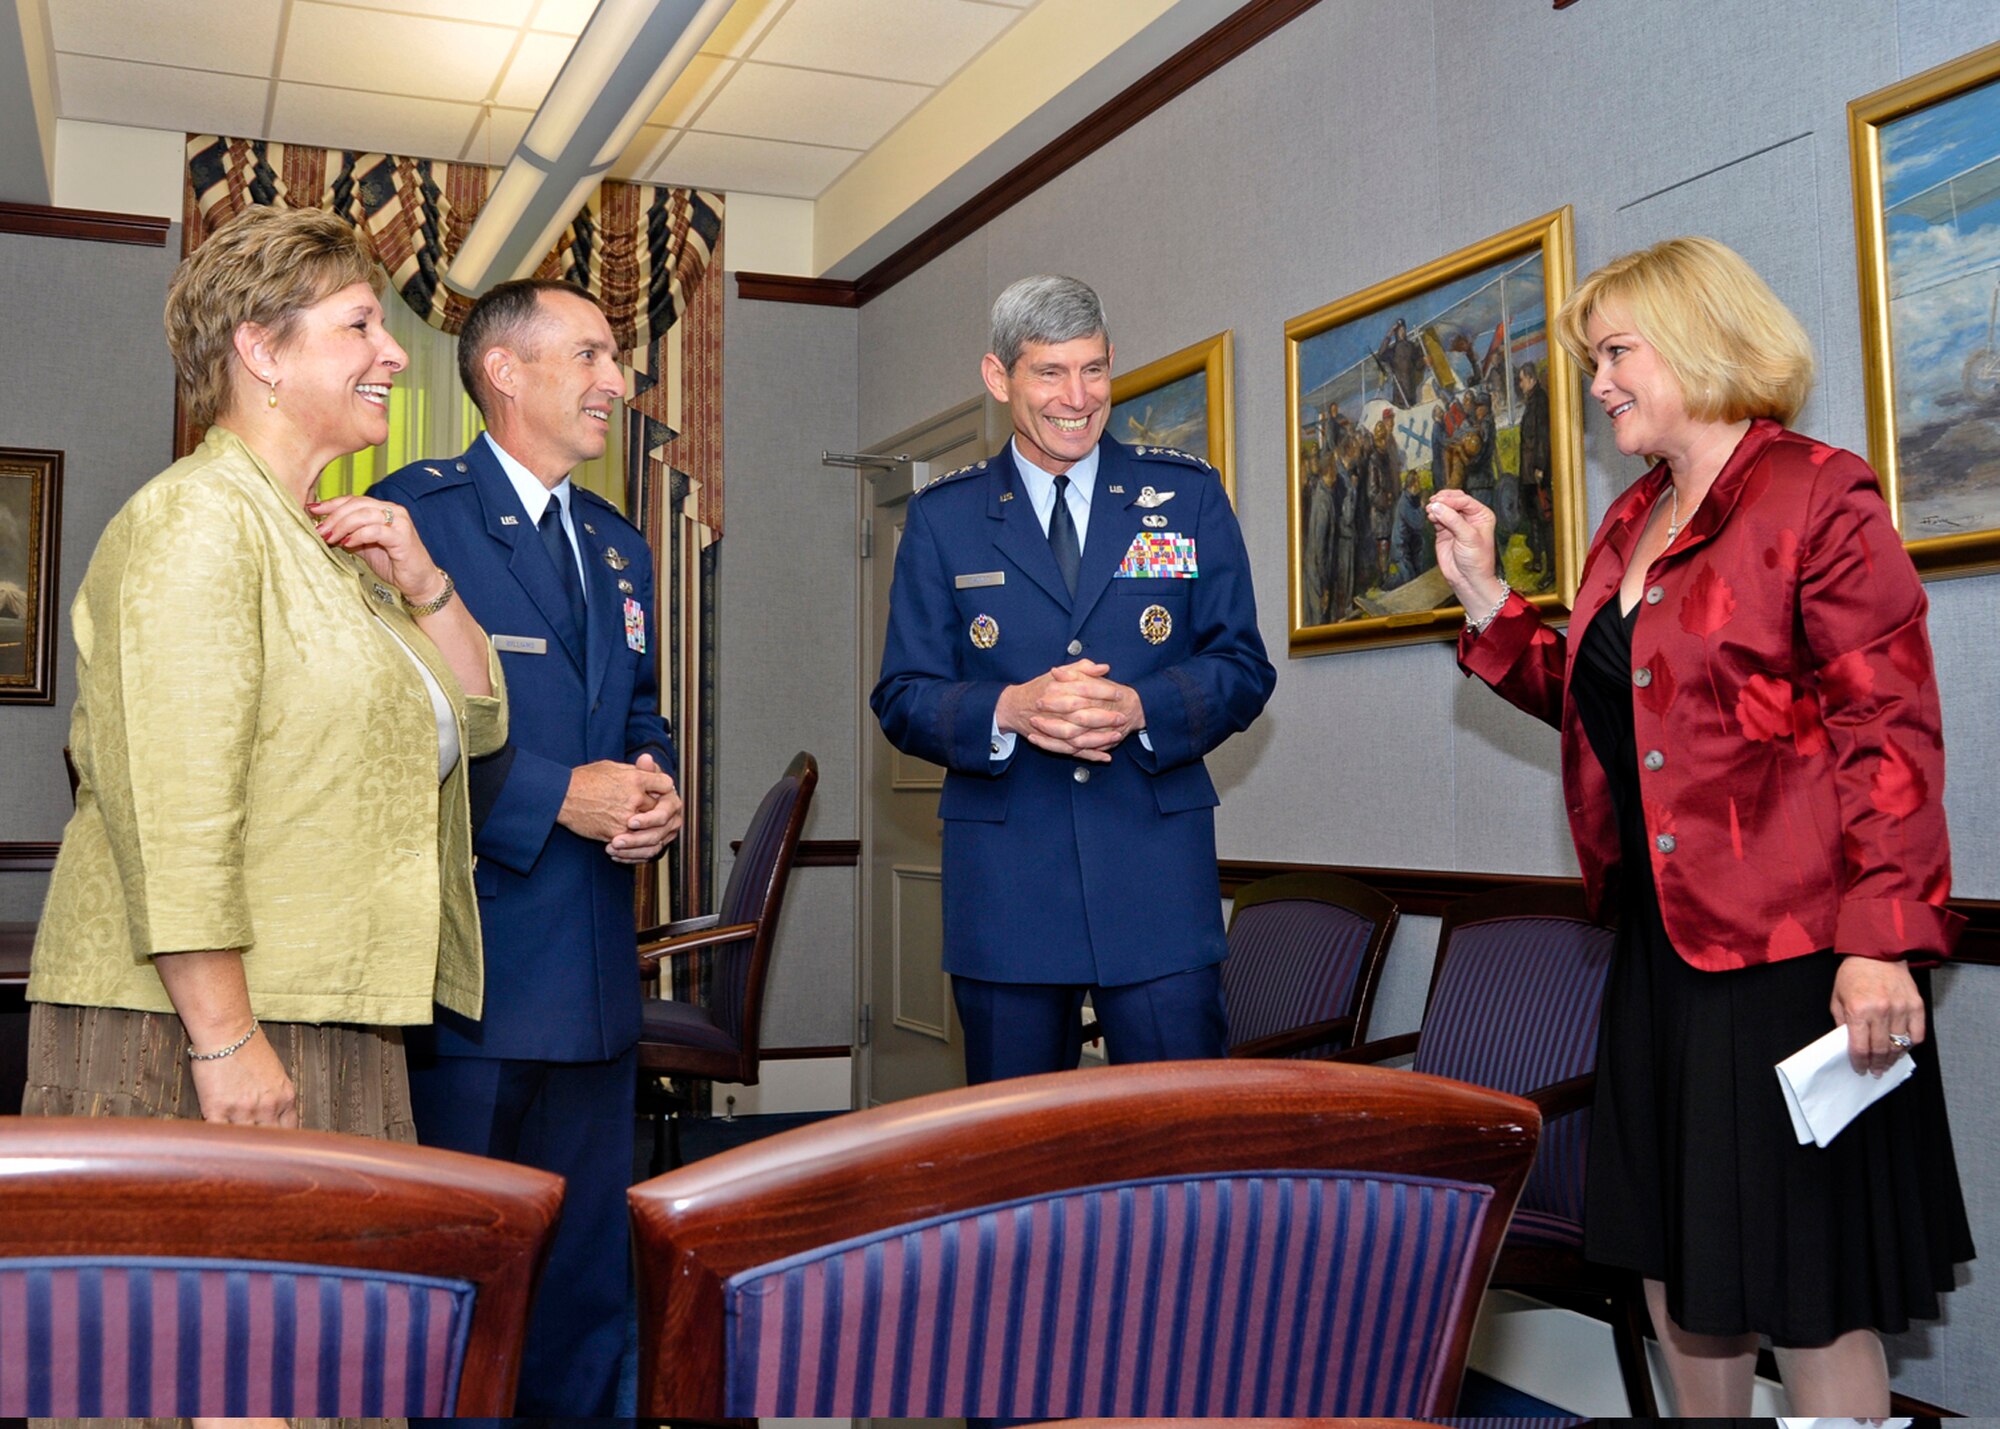 Sharon O'Malley Burg, daughter of the late Gen. Jerome and Diane O'Malley, makes a point during an informal conversation with Air Force Chief of Staff Gen. Norton Schwartz and Brig. Gen. Brett and Marianne Williams prior to the start of a ceremony at the Pentagon Sept. 11, 2009, honoring General and Mrs. Williams.  They are the recipients of the 2009 General and Mrs. Jerome O'Malley Award.  The award was established after the O'Malleys, who were known for their leadership and contributions to Air Force families and communities, were killed in a plane crash in 1985.  (U.S. Air Force photo/Michael Pausic)